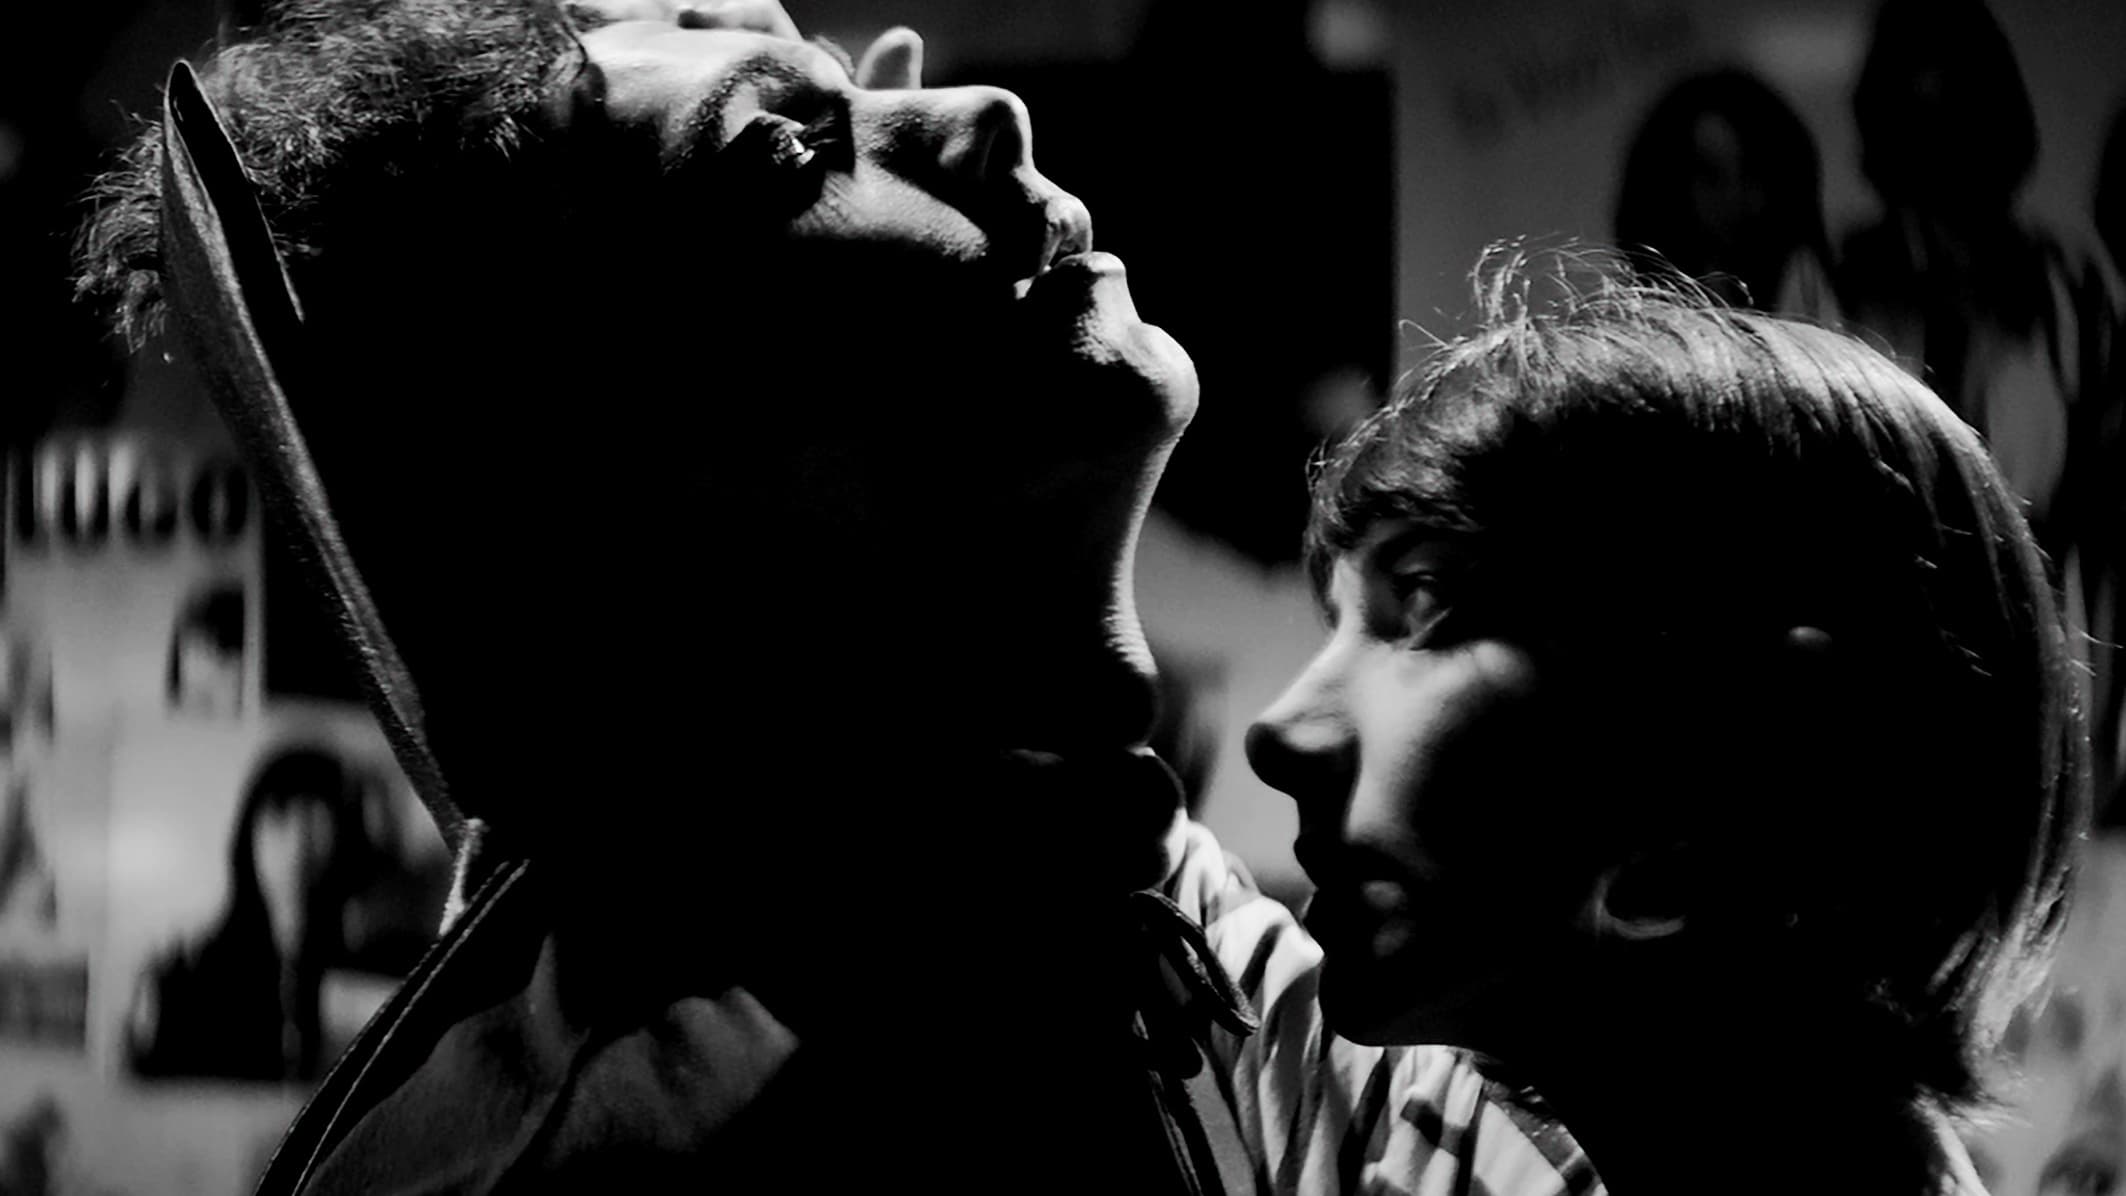 Image du film "A Girl Walks Home Alone at Night"